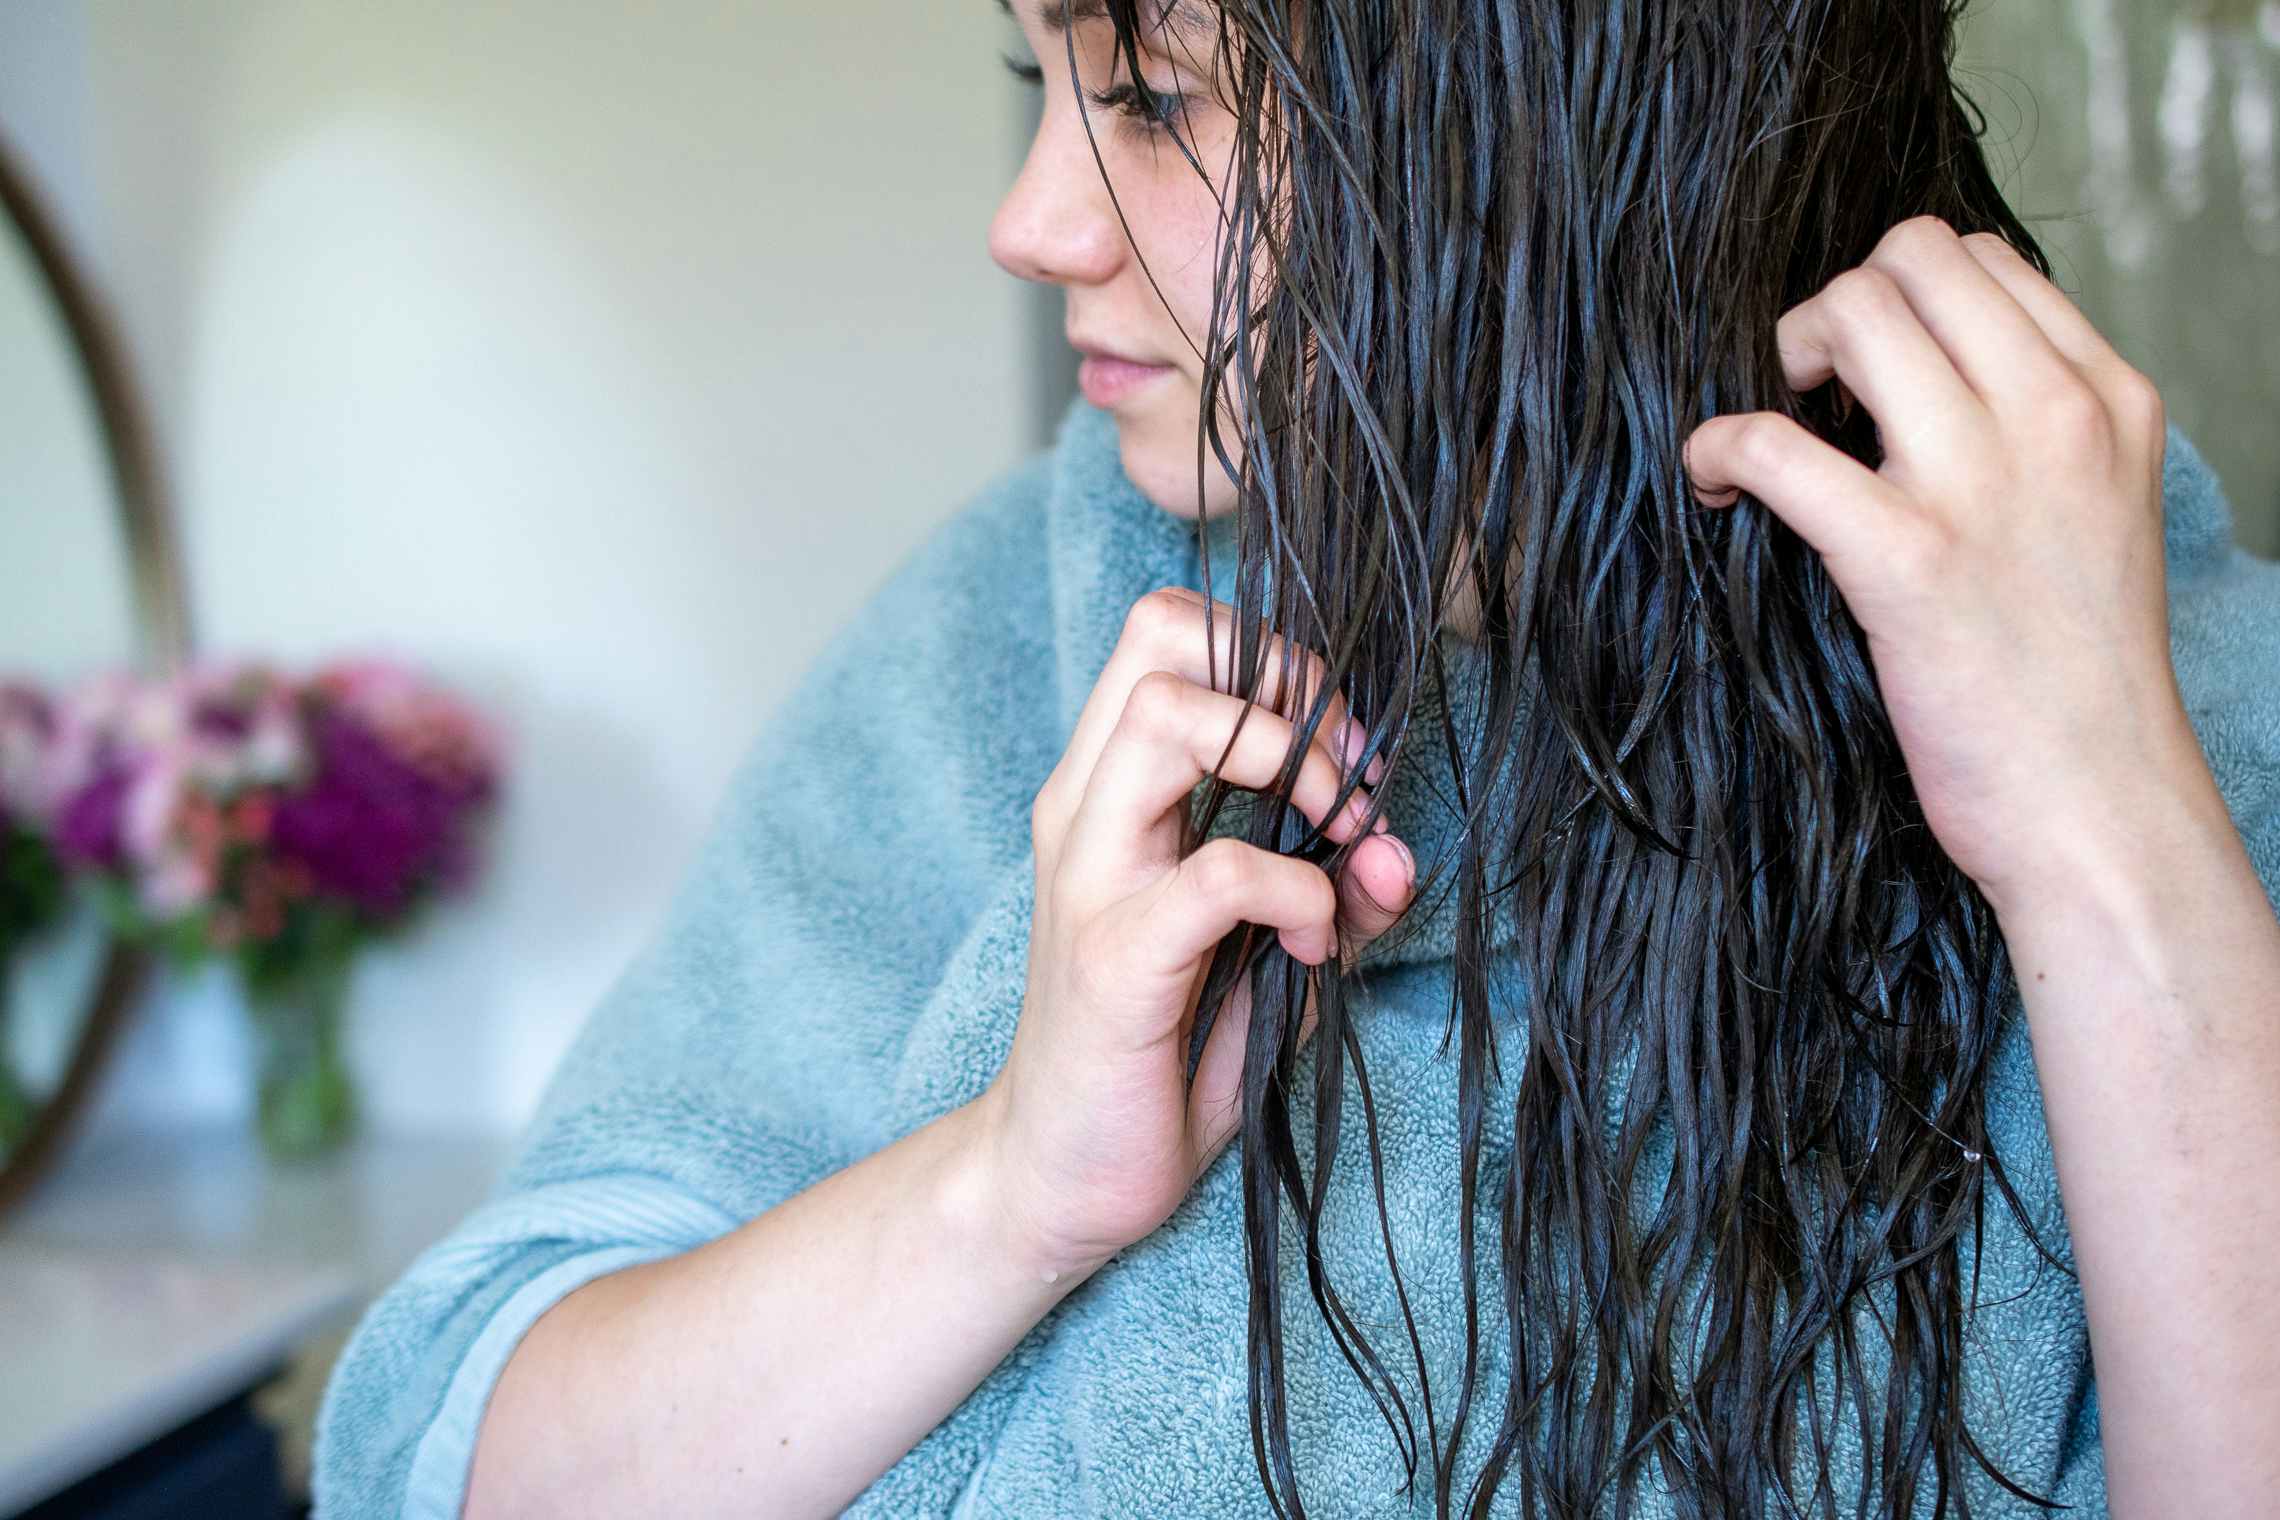 A woman combing through her wet hair with her fingers.